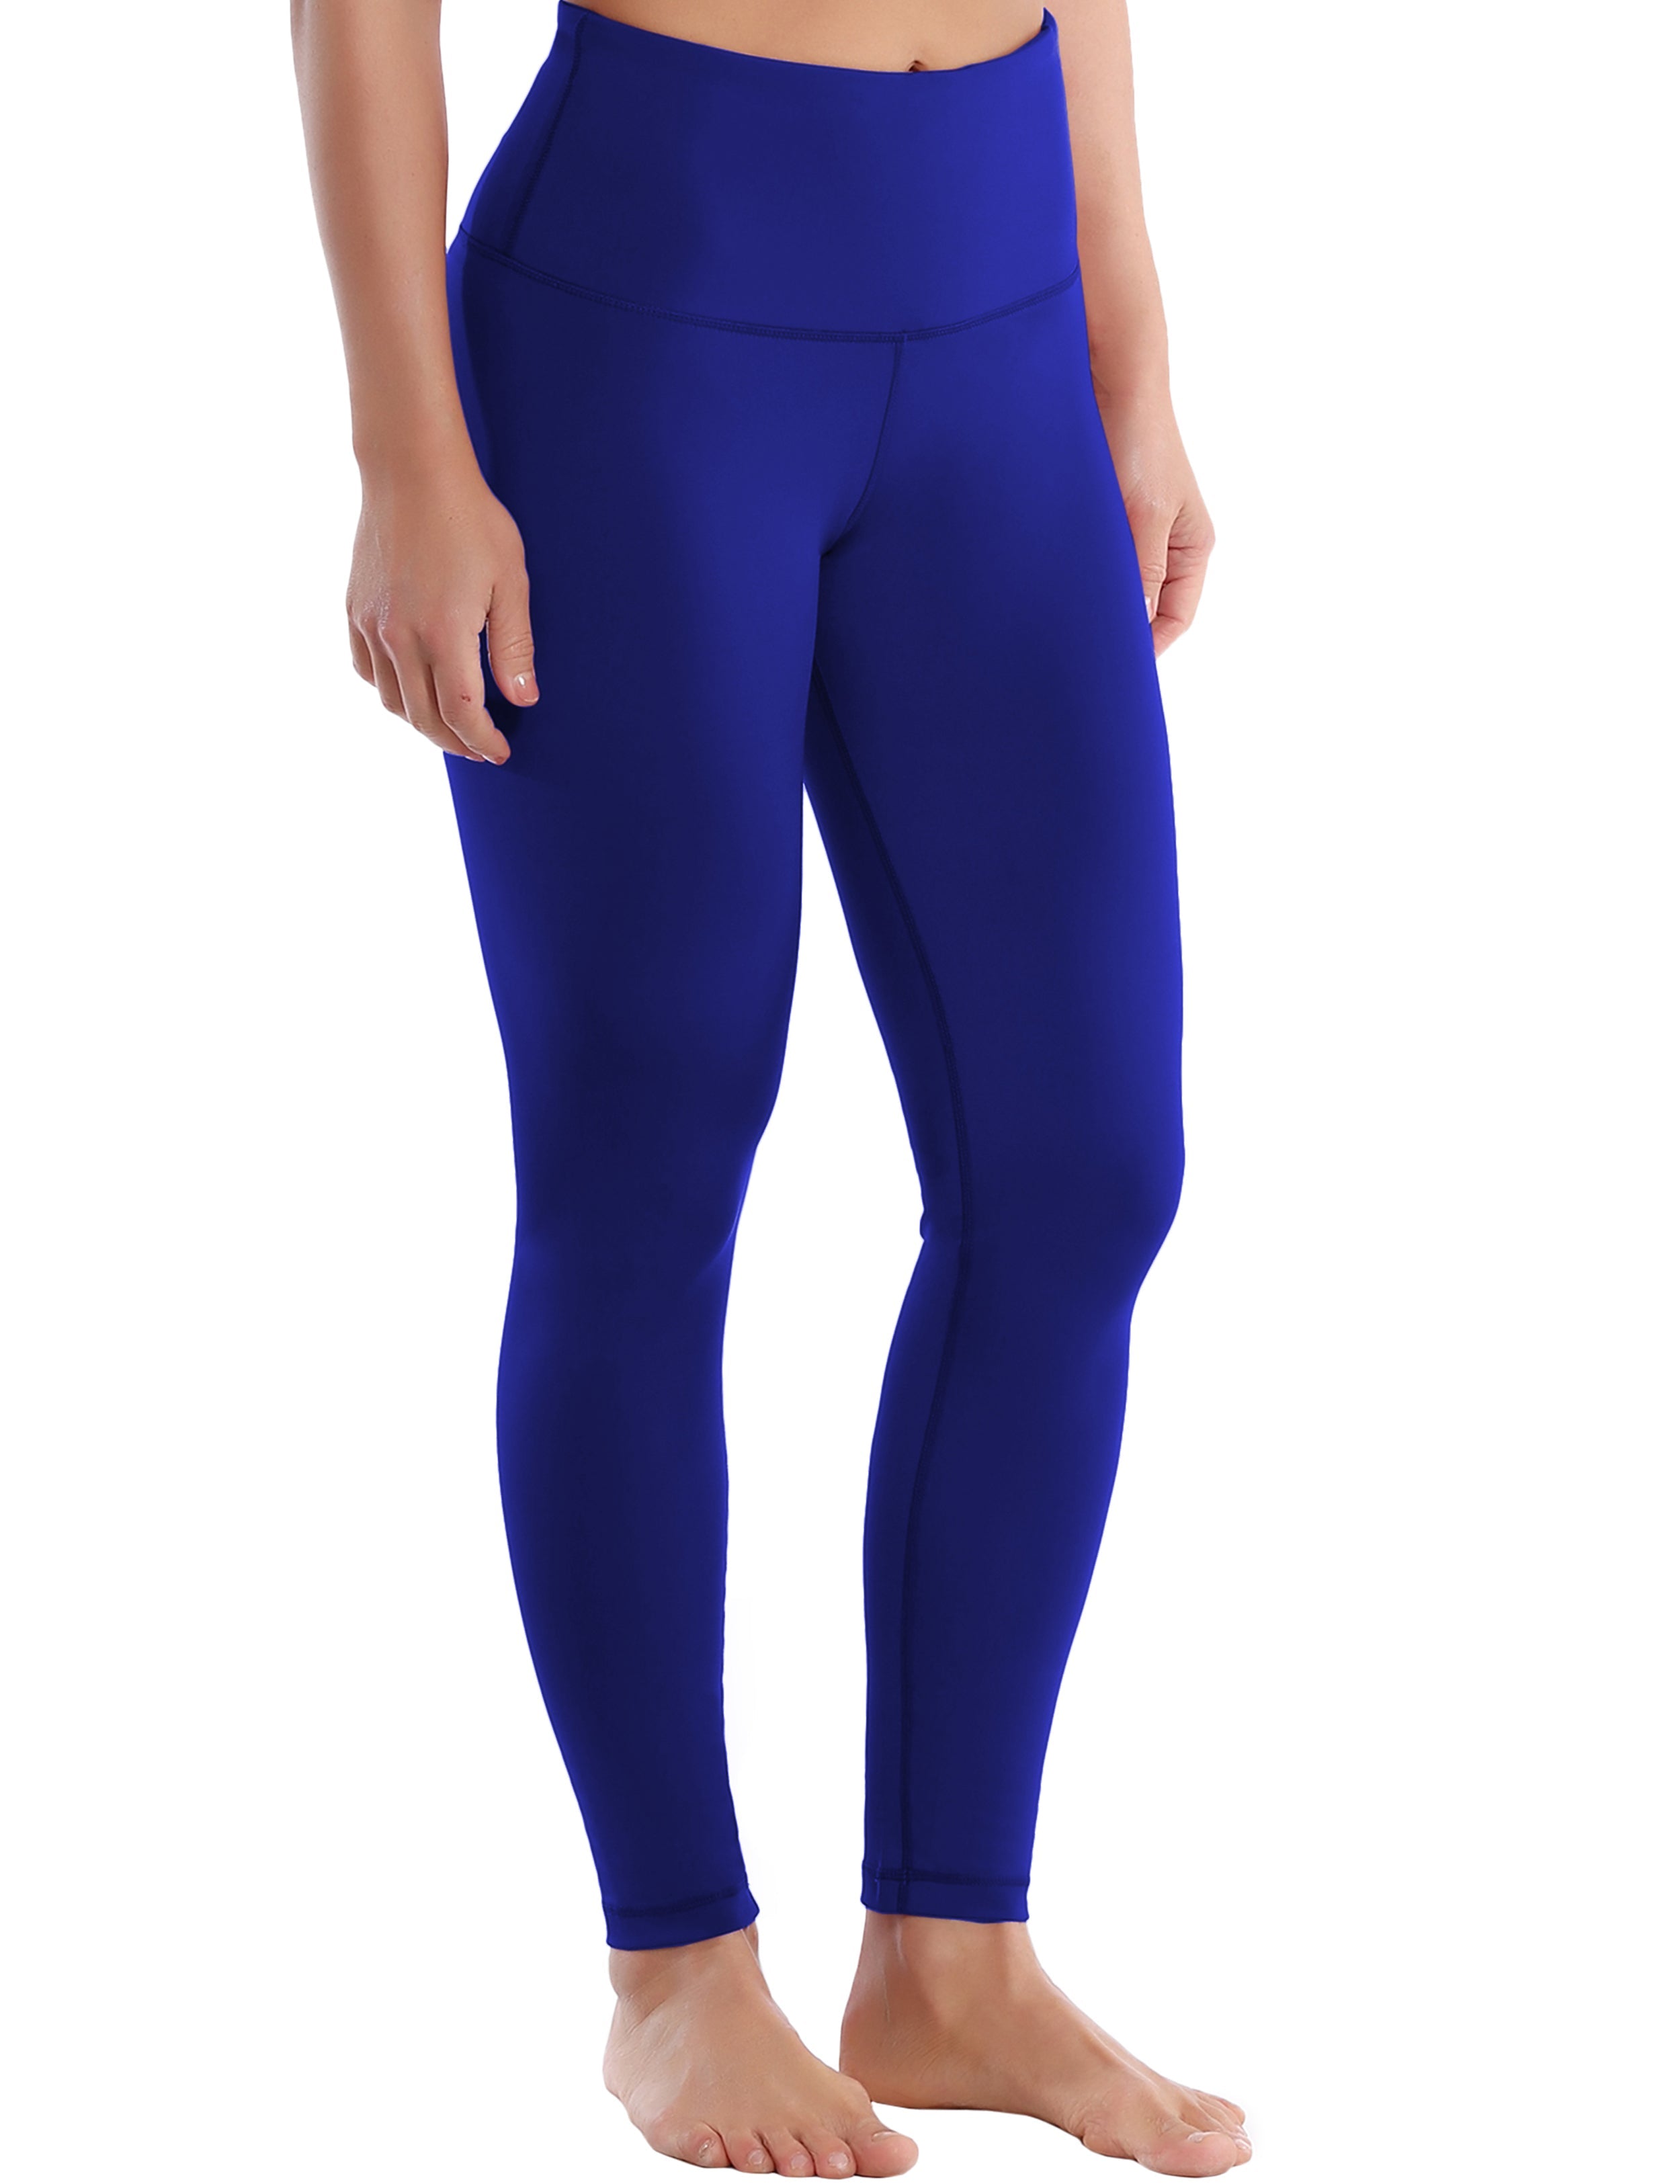 High Waist Biking Pants navy 75%Nylon/25%Spandex Fabric doesn't attract lint easily 4-way stretch No see-through Moisture-wicking Tummy control Inner pocket Four lengths